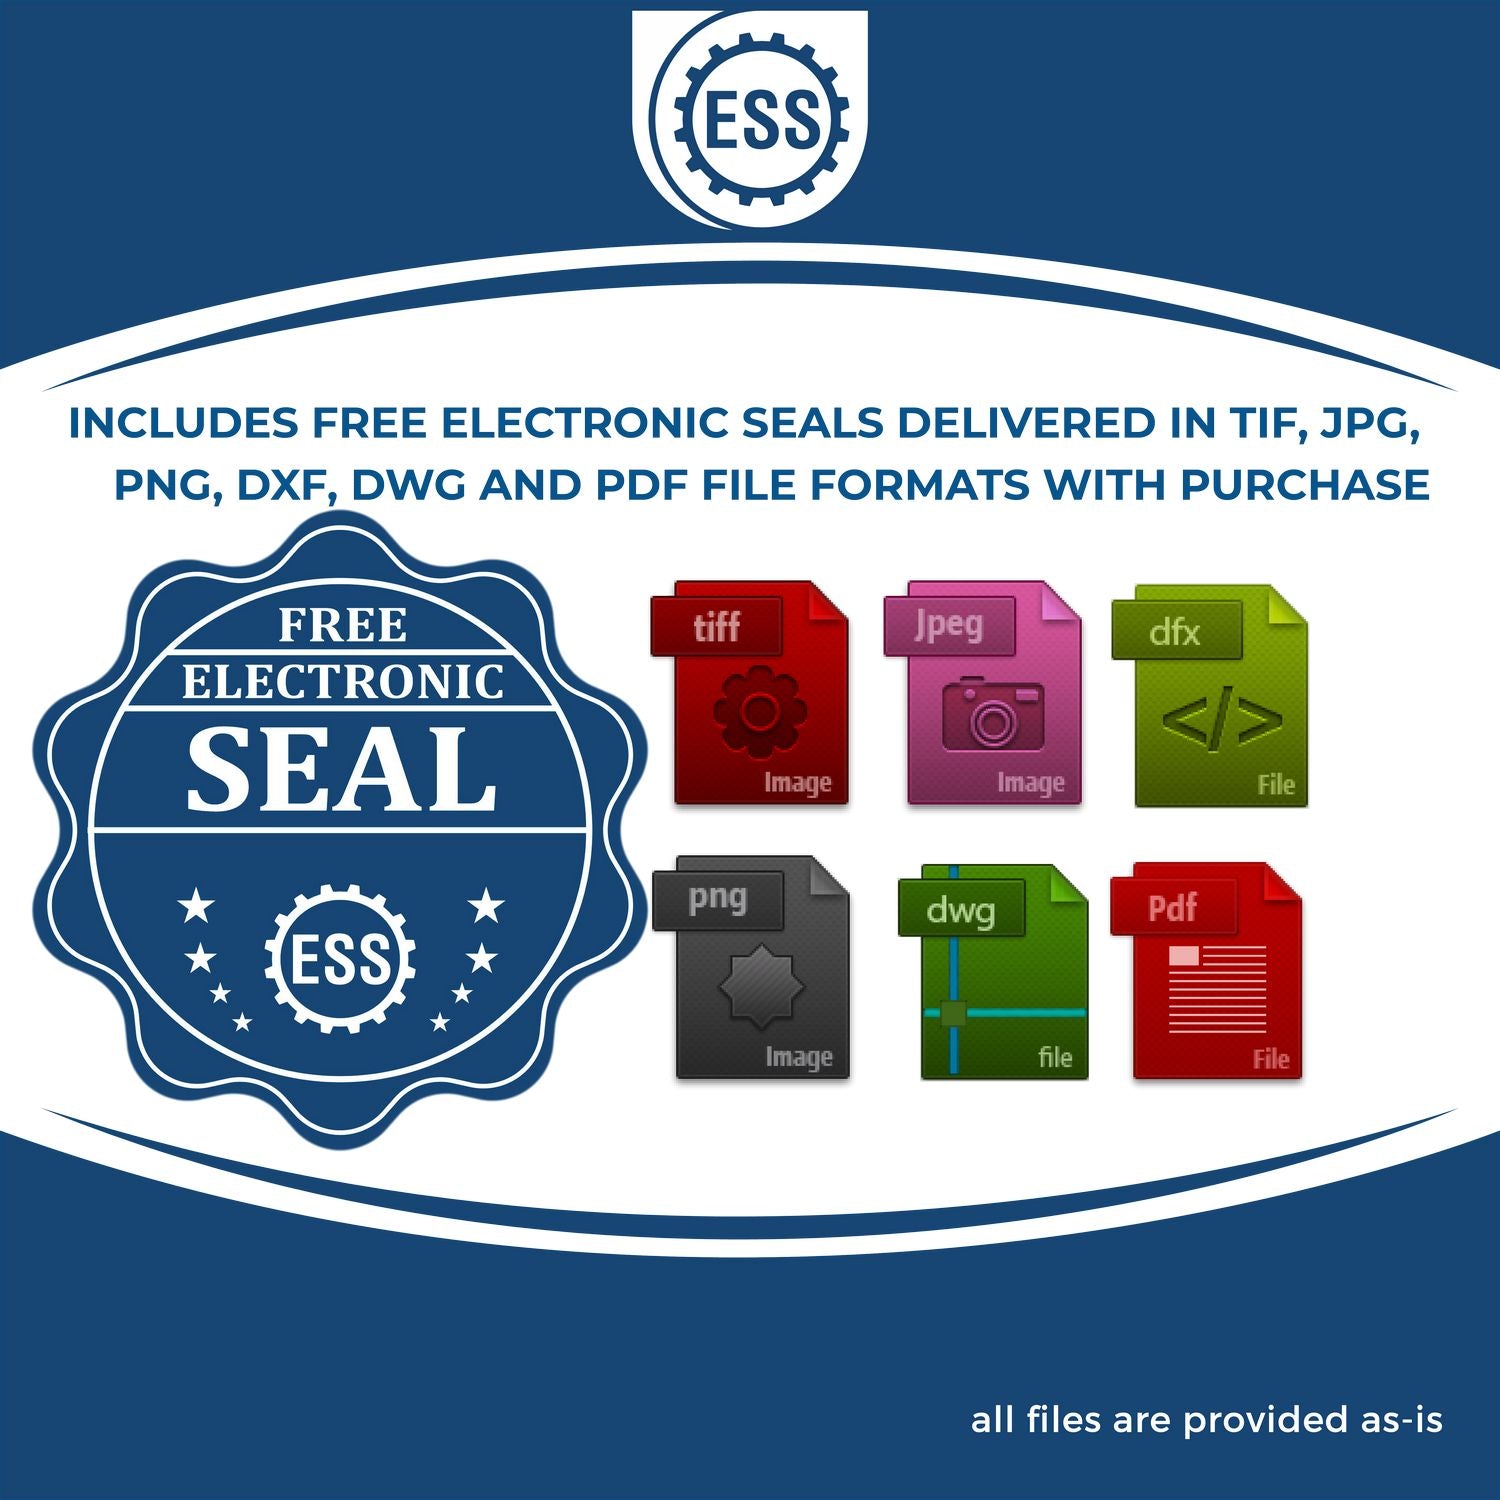 An infographic for the free electronic seal for the State of Puerto Rico Extended Long Reach Engineer Seal illustrating the different file type icons such as DXF, DWG, TIF, JPG and PNG.